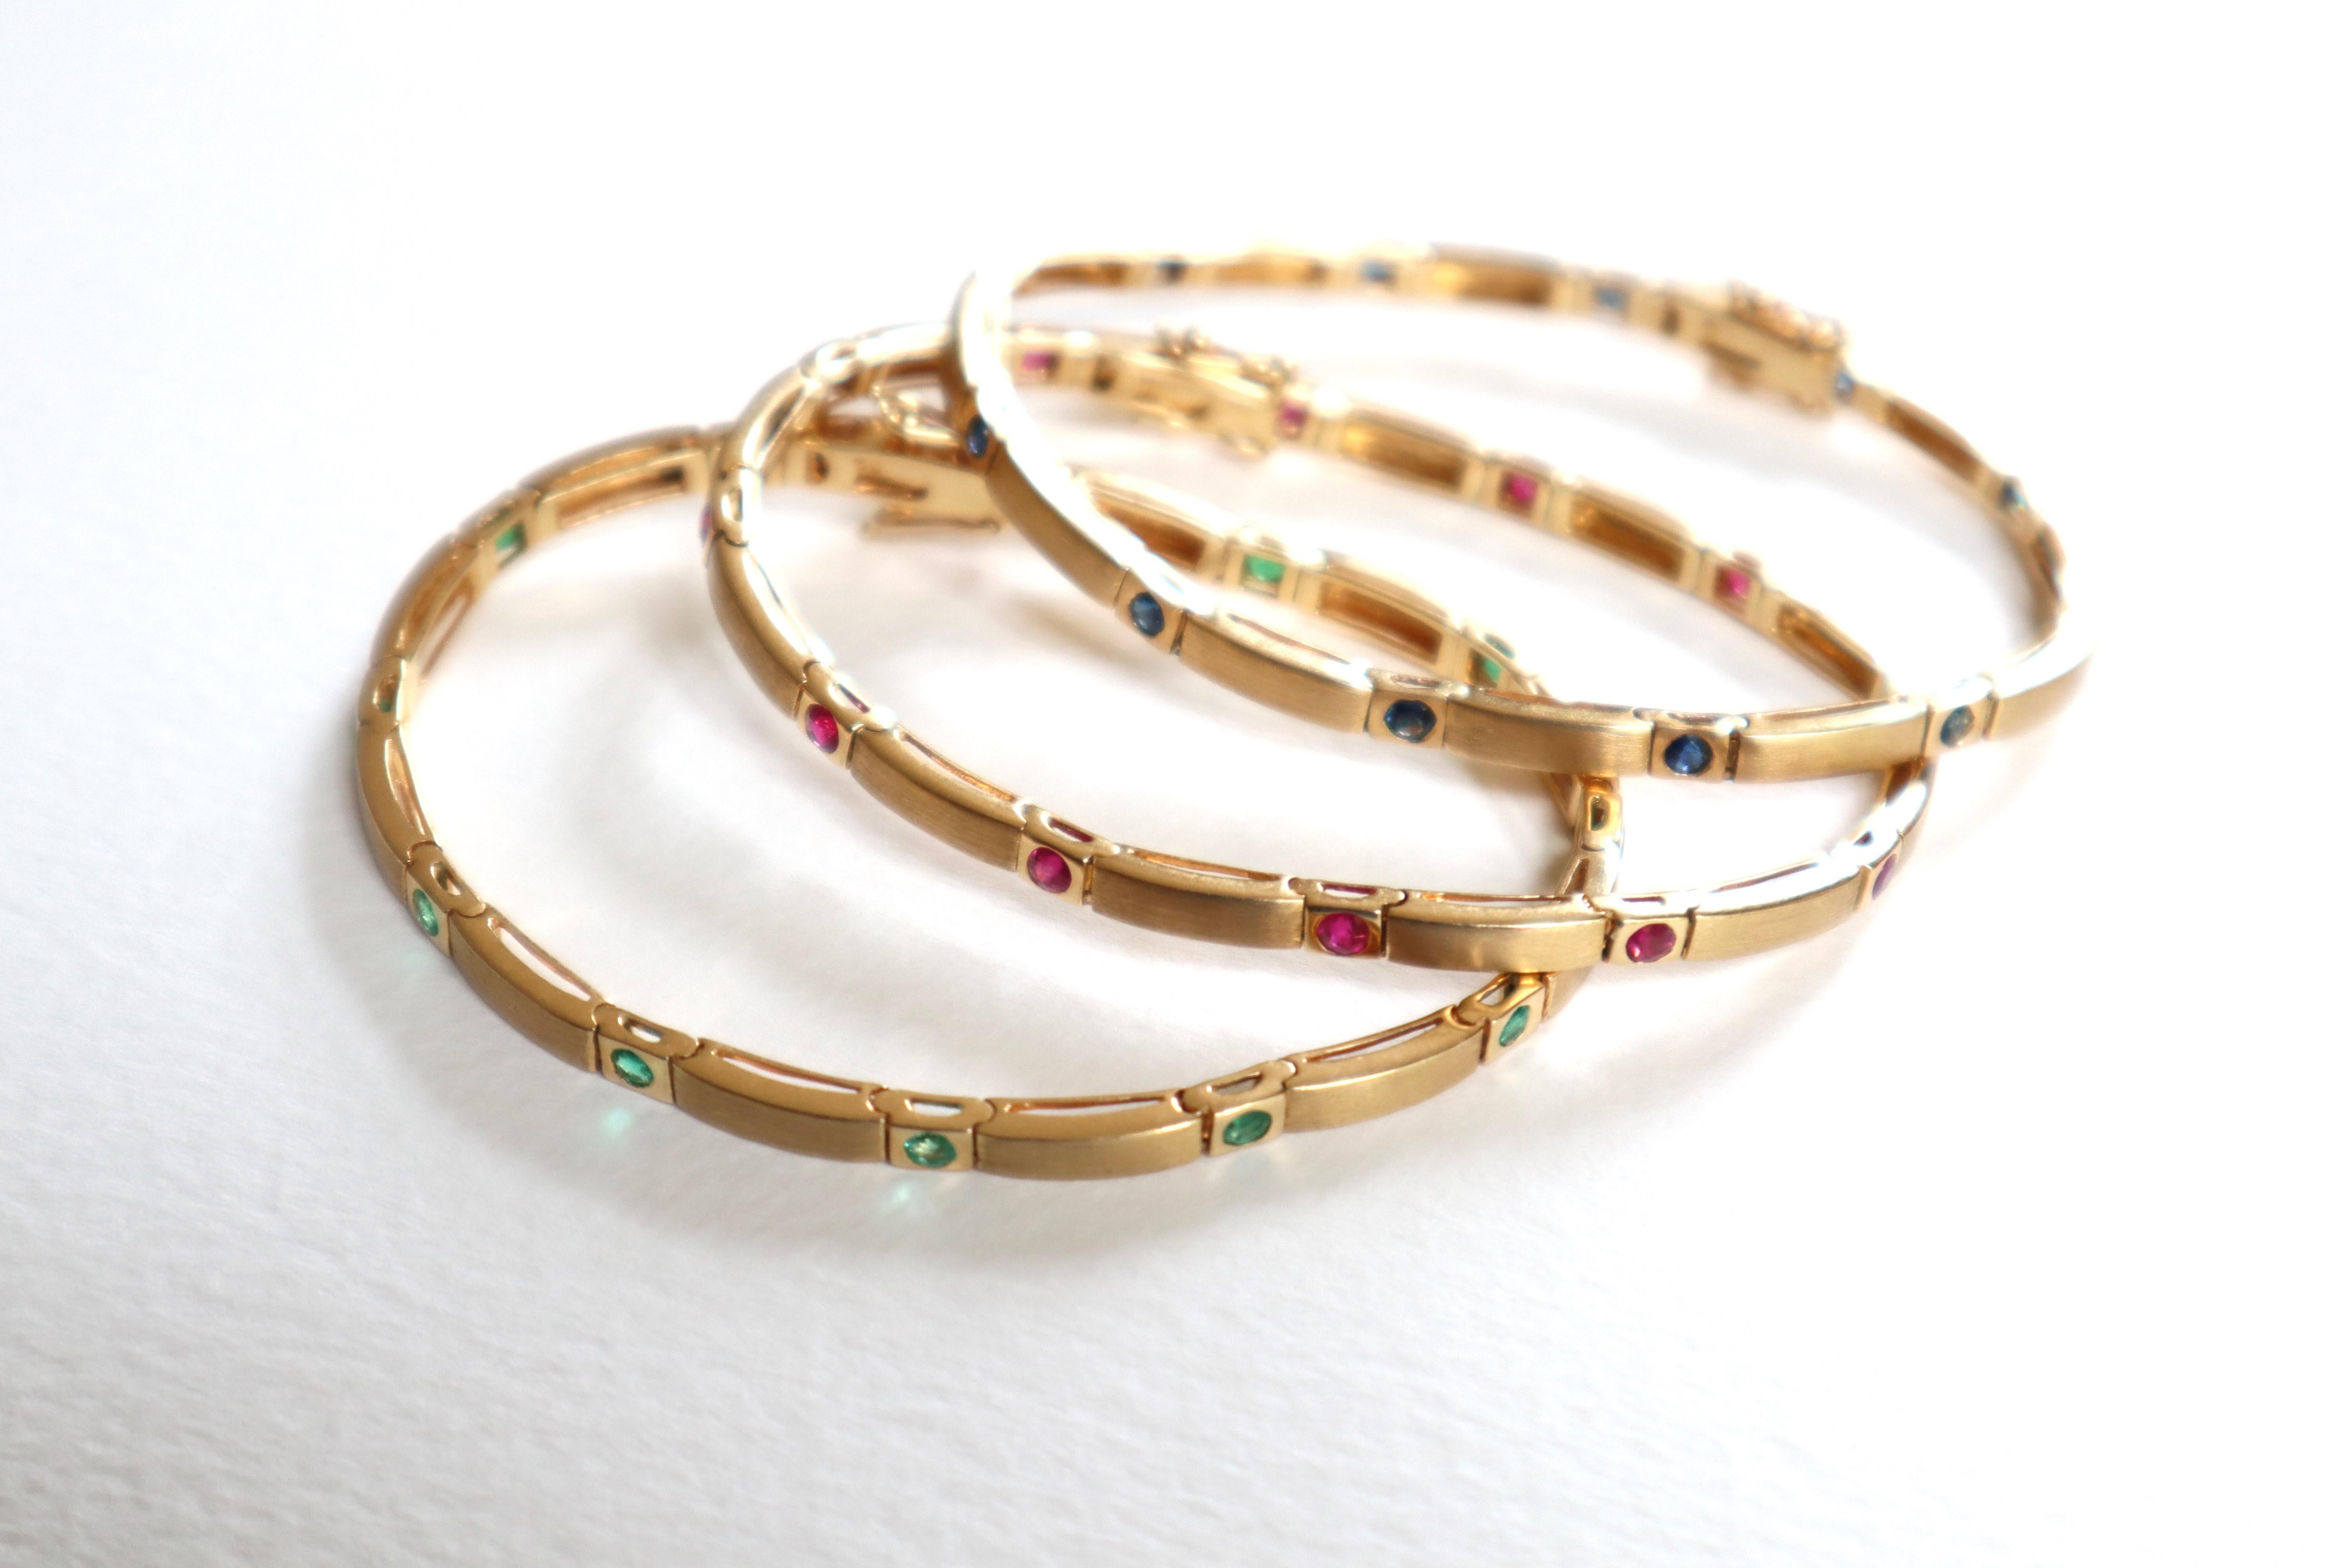 Women's Set of 3 Bracelets in 18 Kt Yellow Satin Gold, Rubies, Emeralds, Sapphires For Sale